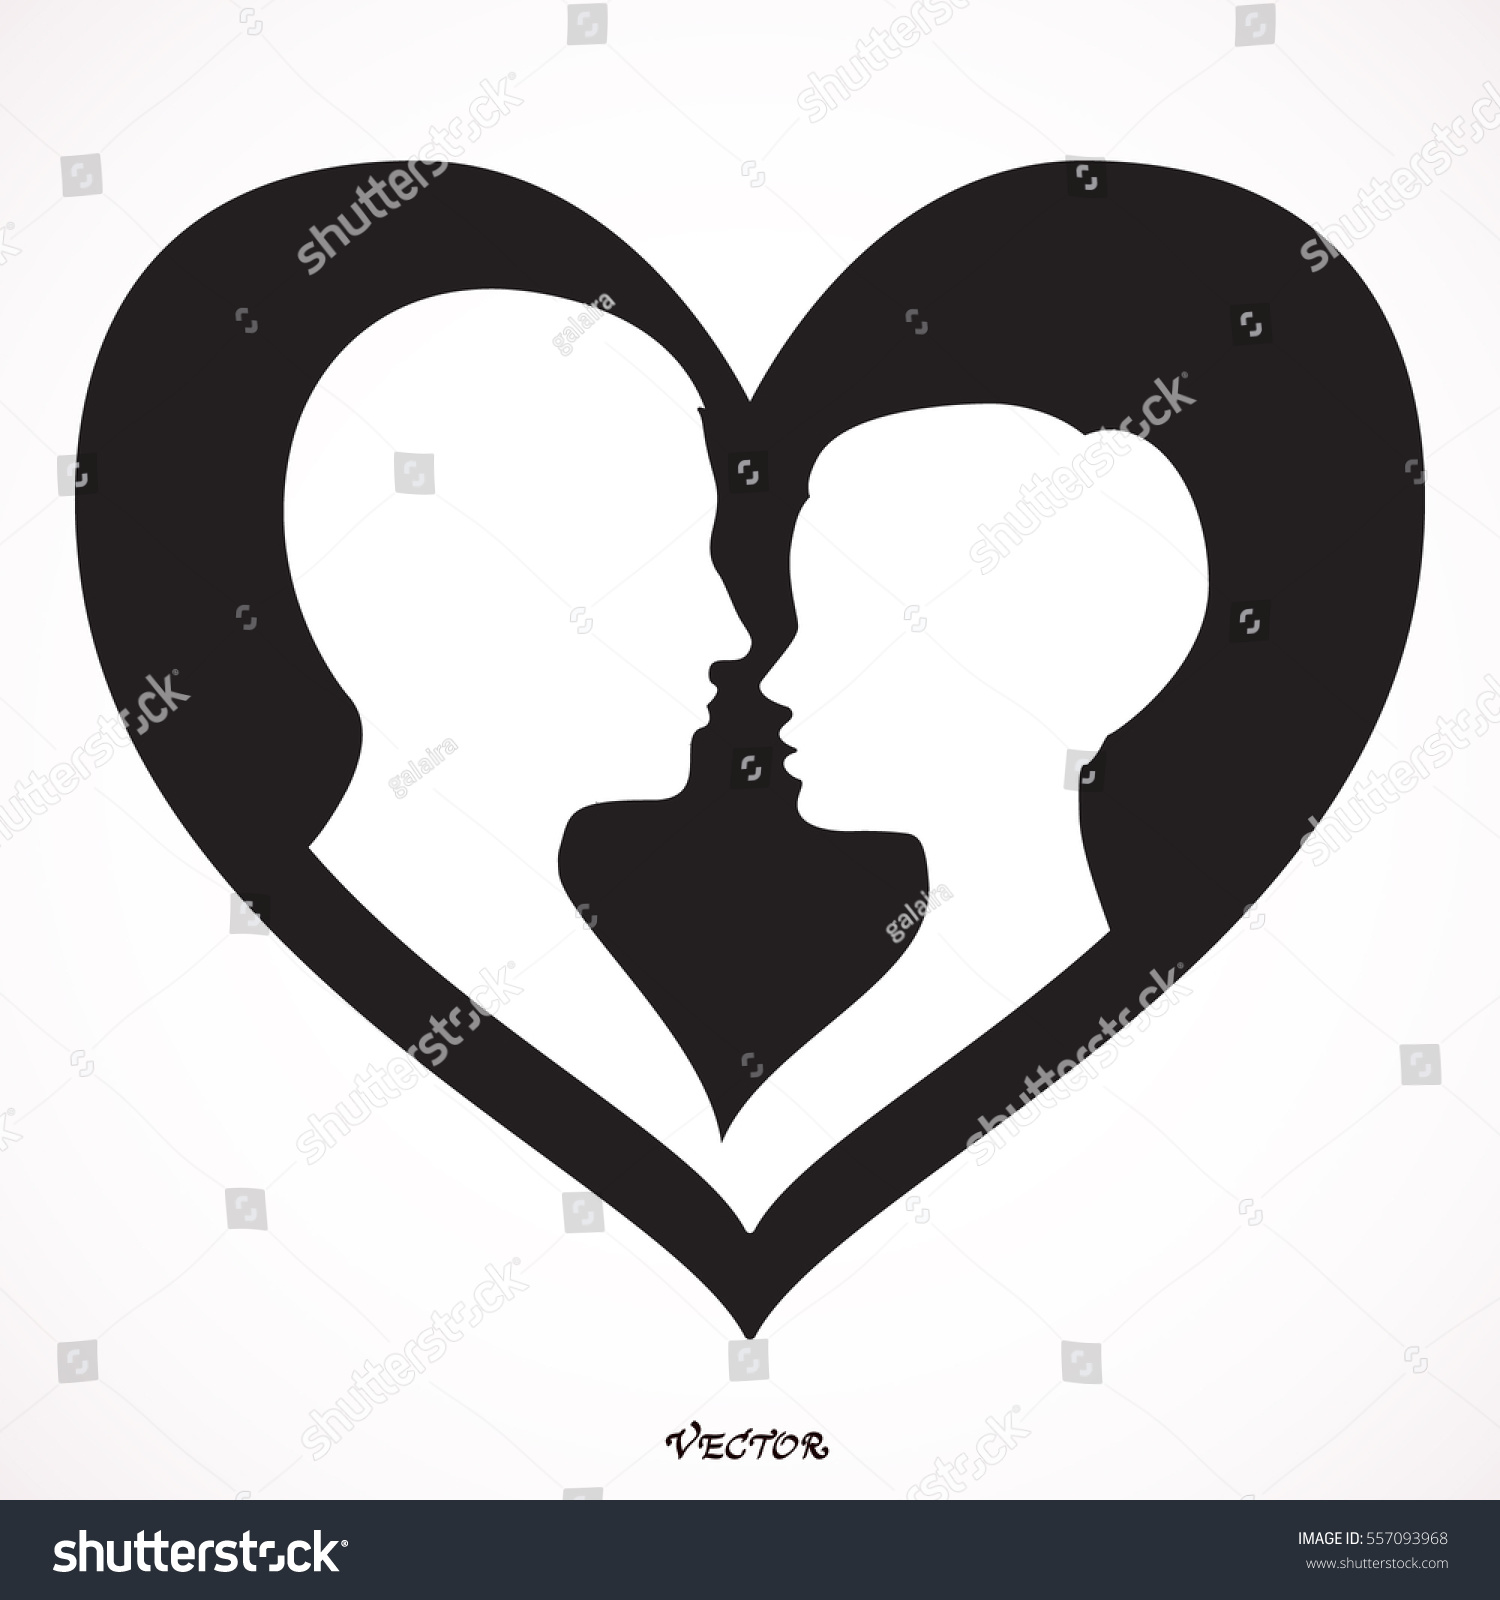 Silhouette Couple Man Woman Silhouette Heart Stock Vector (Royalty Free ...